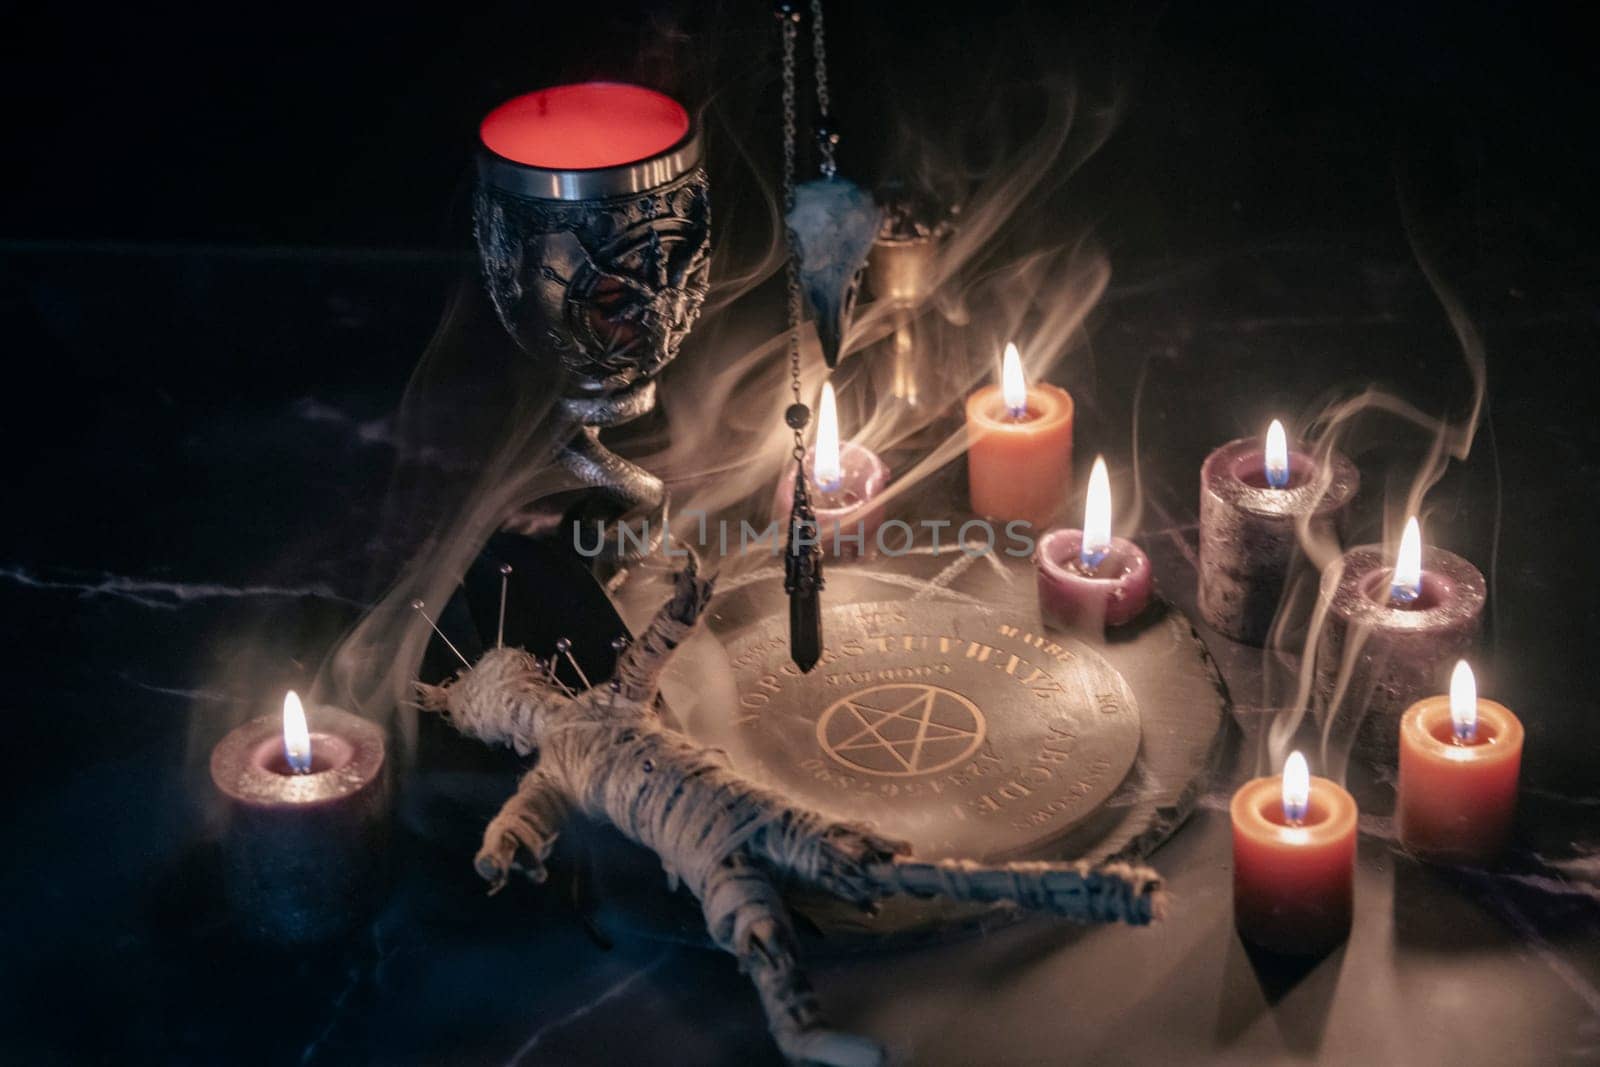 Mysterious Occult Ceremony with Pendulum and Mystic Symbols